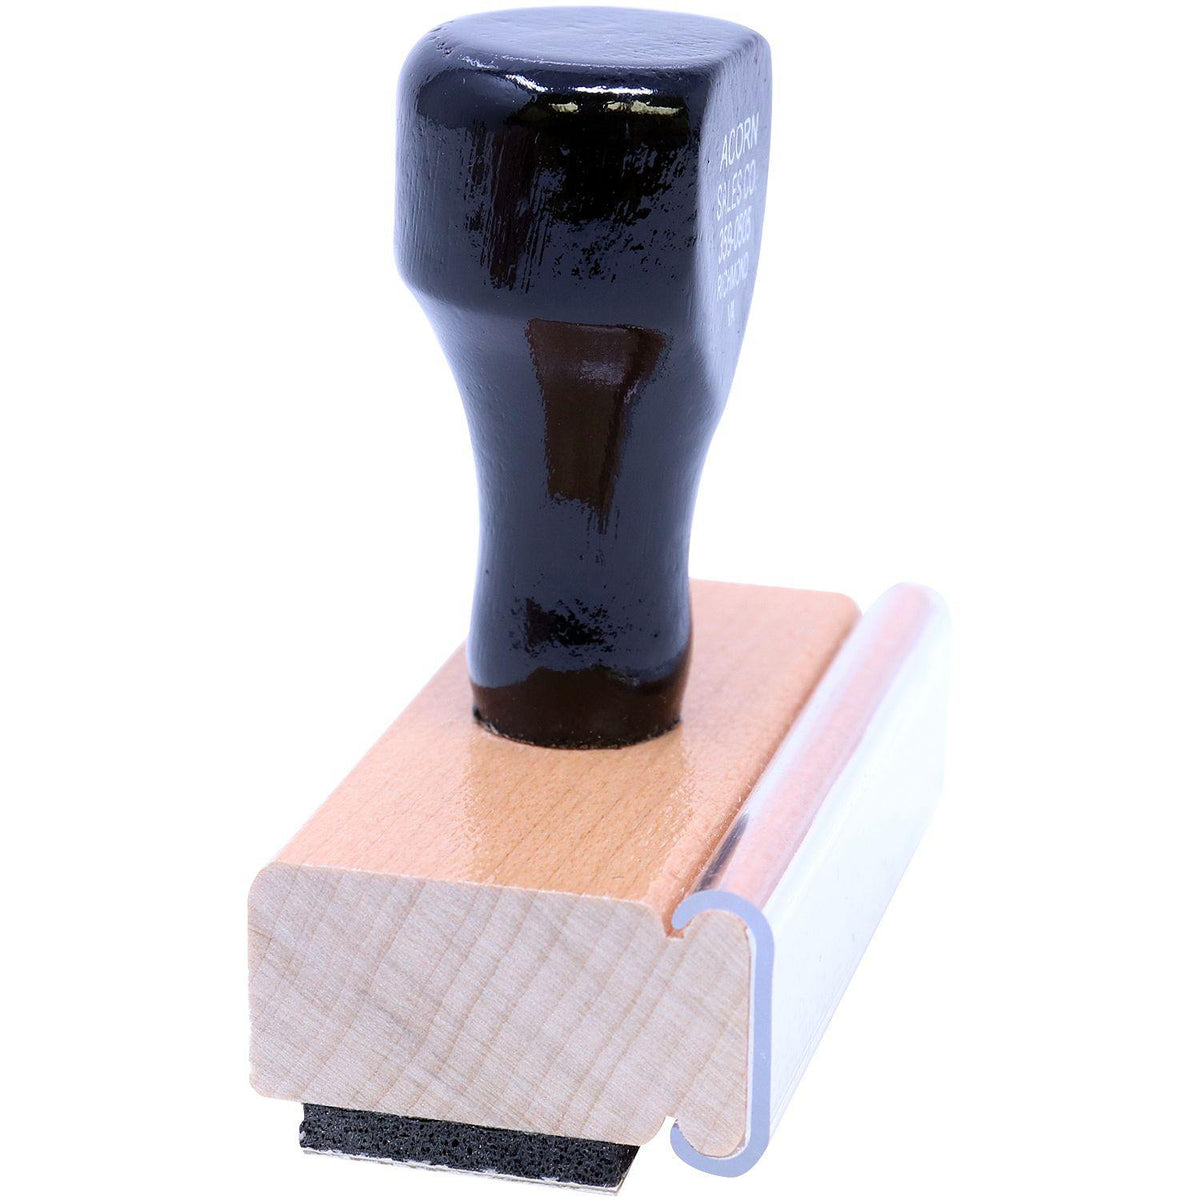 Side View of Large Improving Rubber Stamp at an Angle